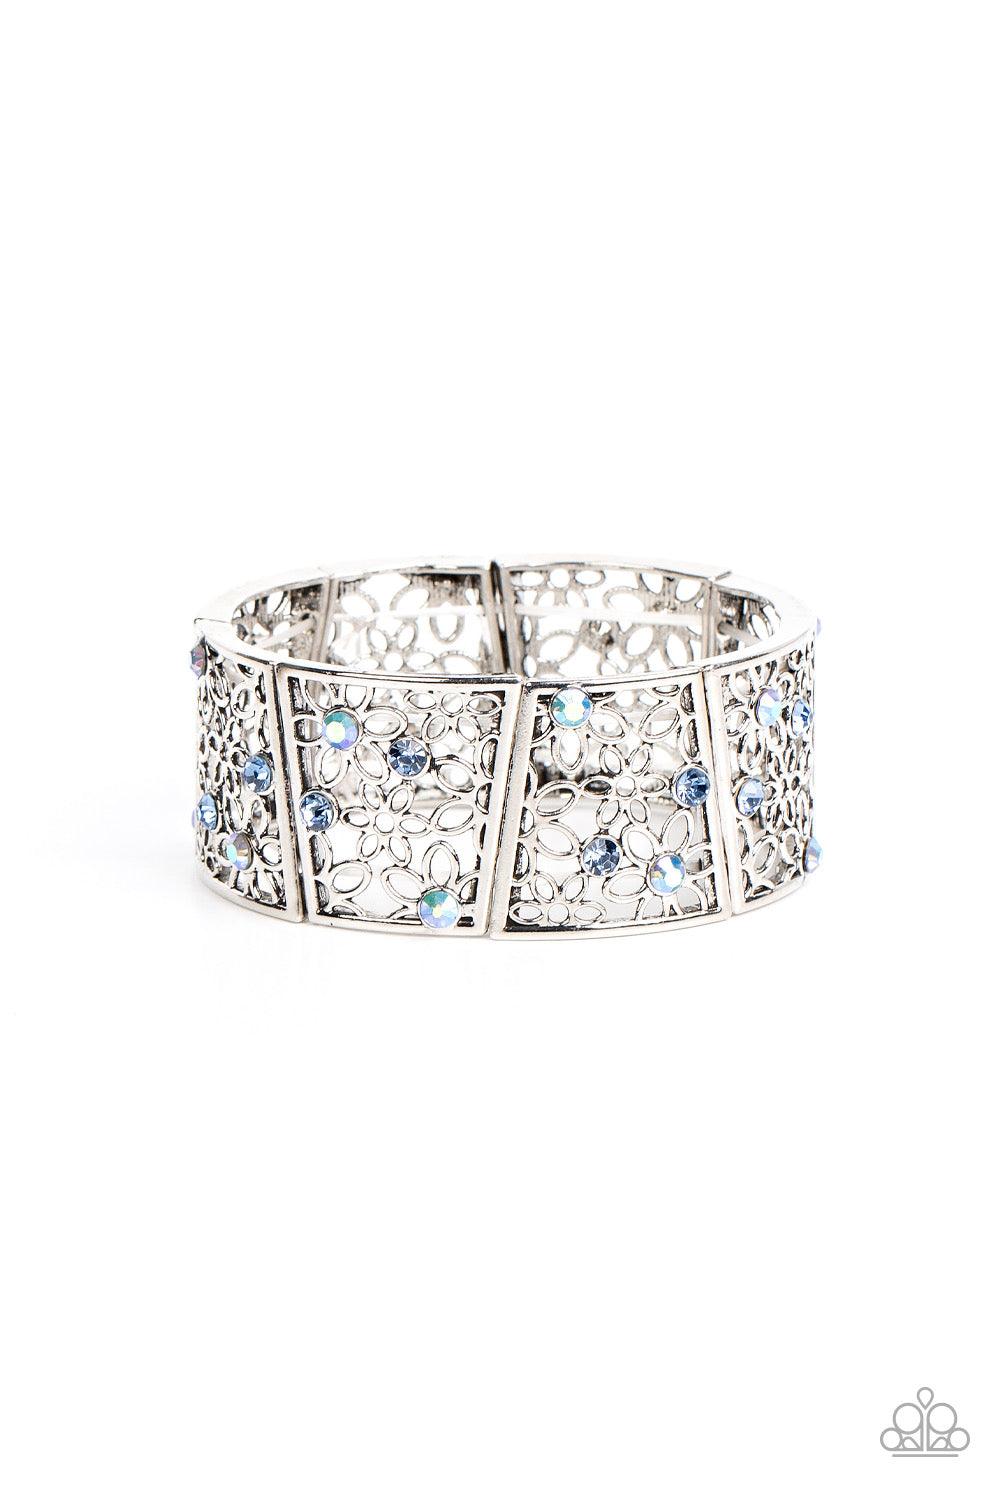 Paparazzi Accessories Spring Greetings - Blue Sporadically dotted with multicolored and iridescent rhinestones, an airy daisy pattern blooms inside trapezoidal silver frames that are threaded along stretchy bands around the wrist for a seasonal statement.